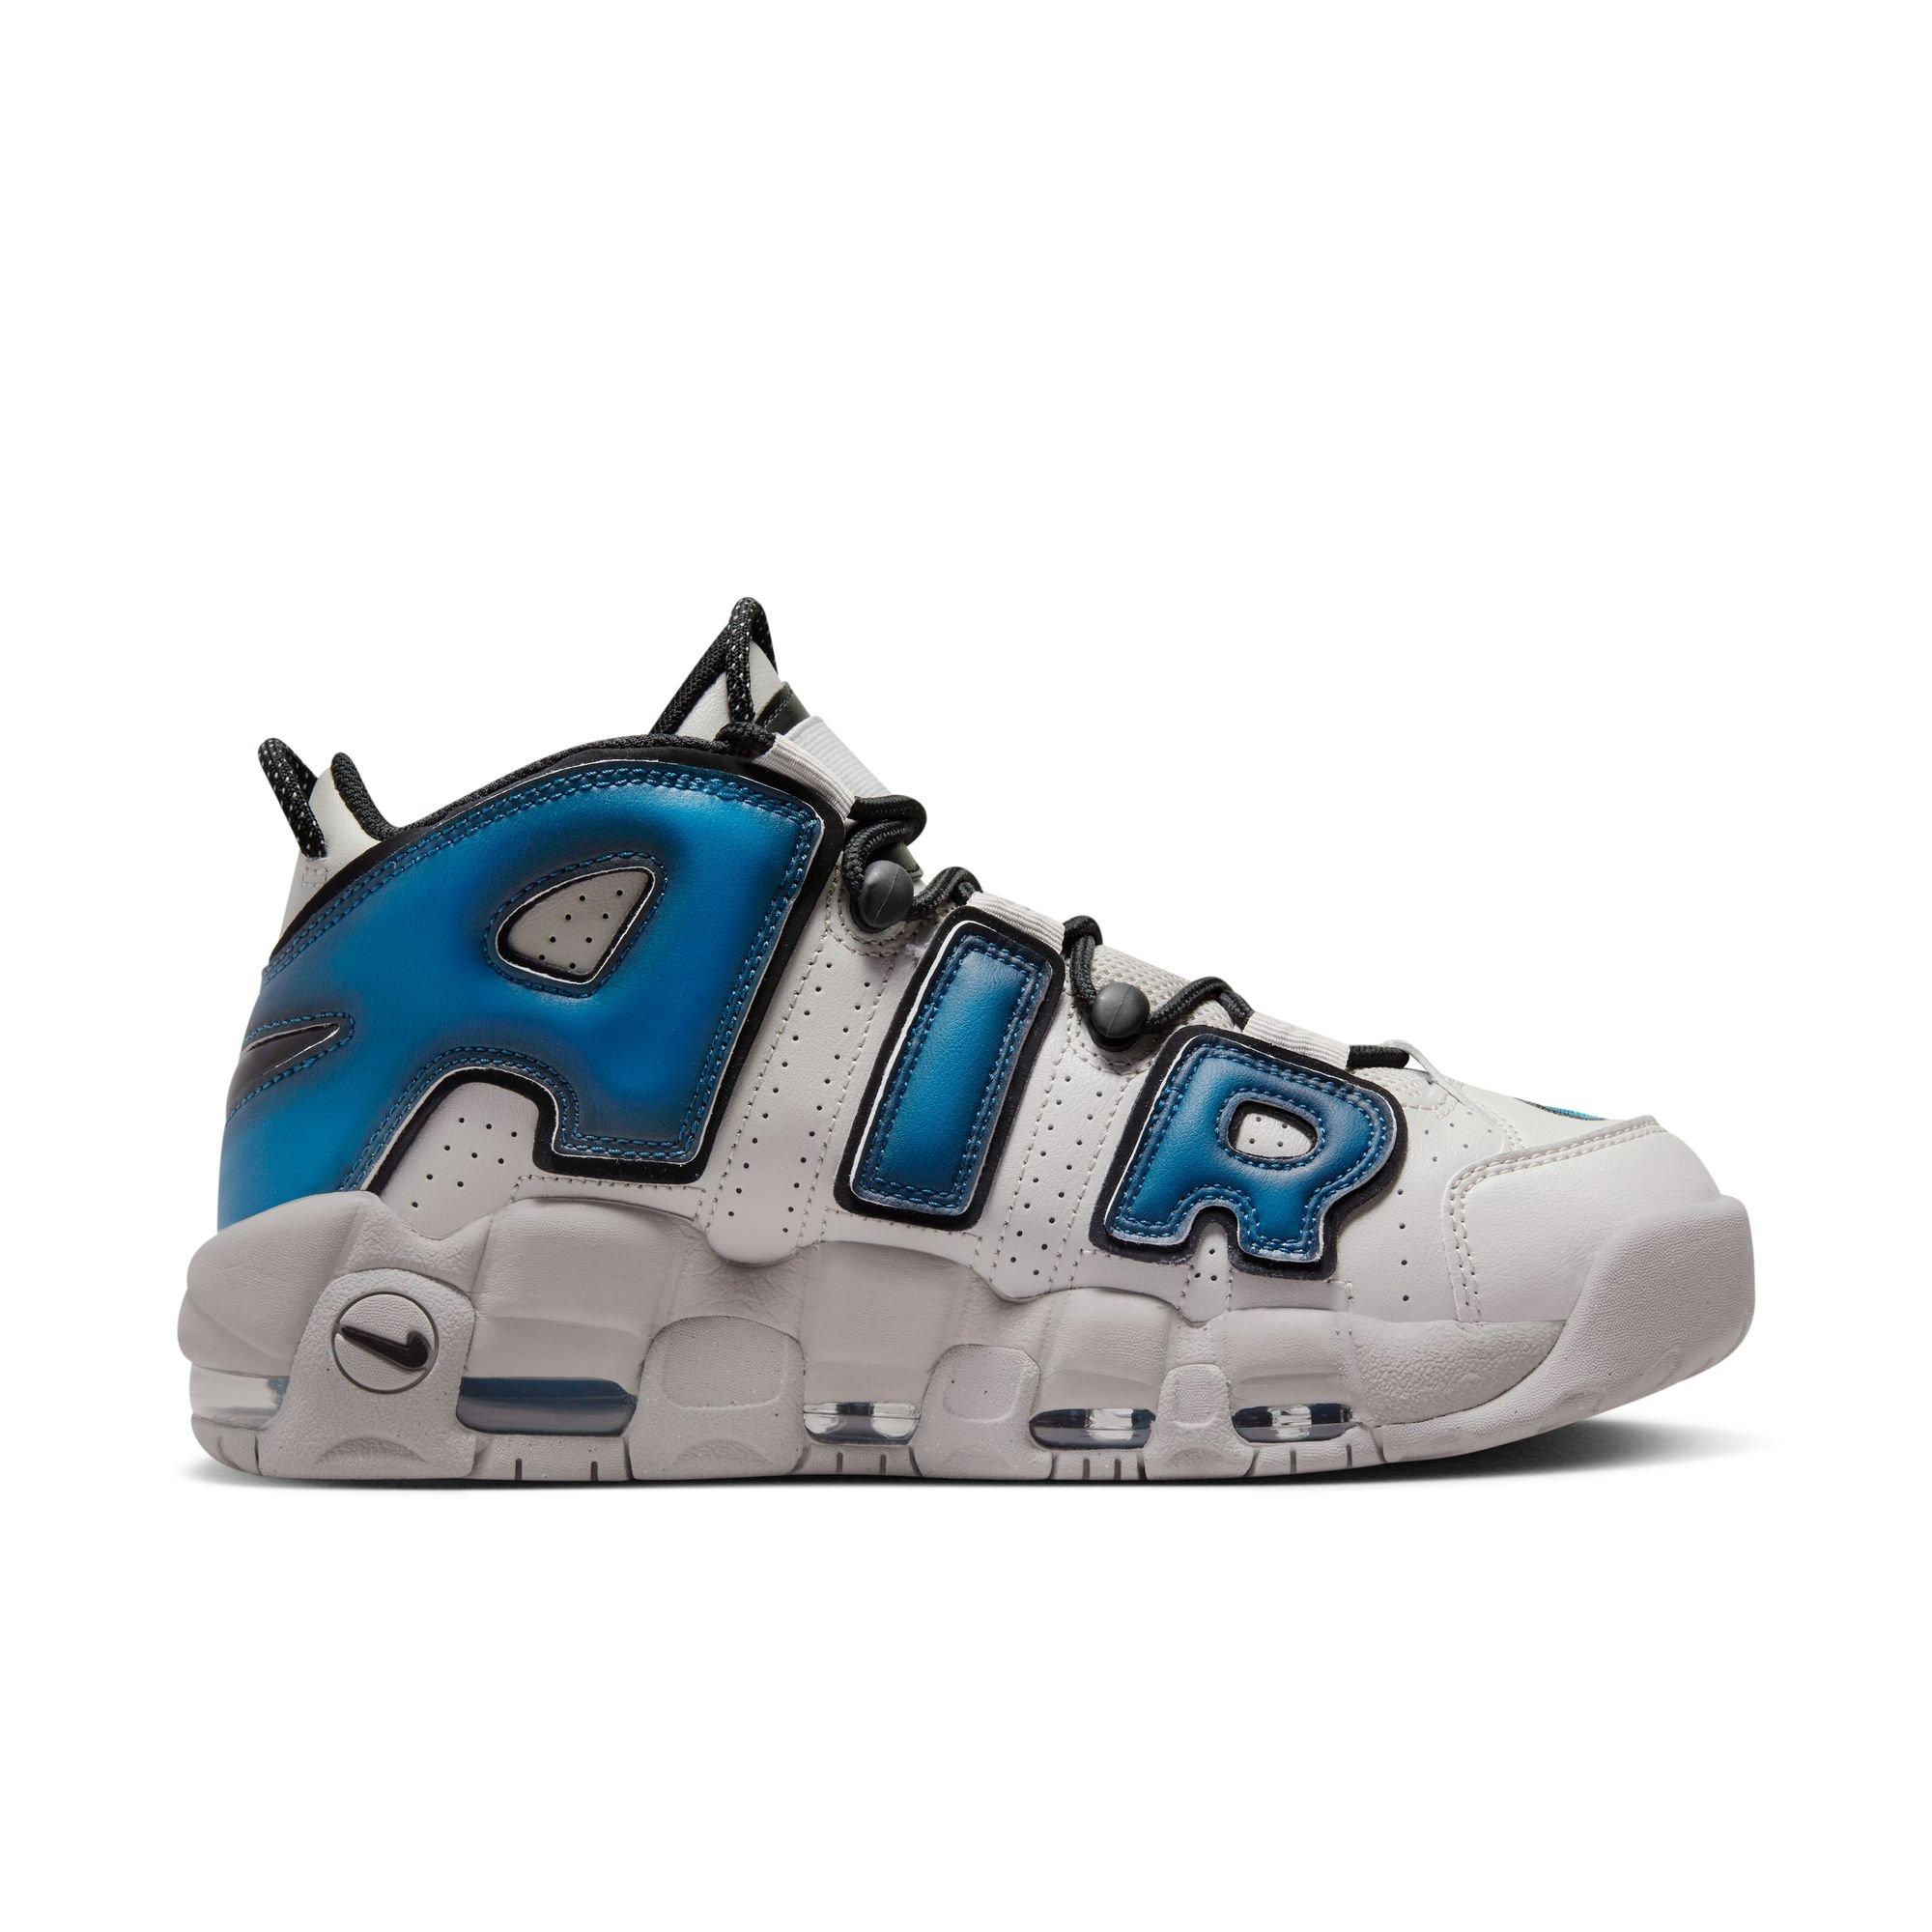 The Nike Air More Uptempo Tri-Color Drops Next Weekend